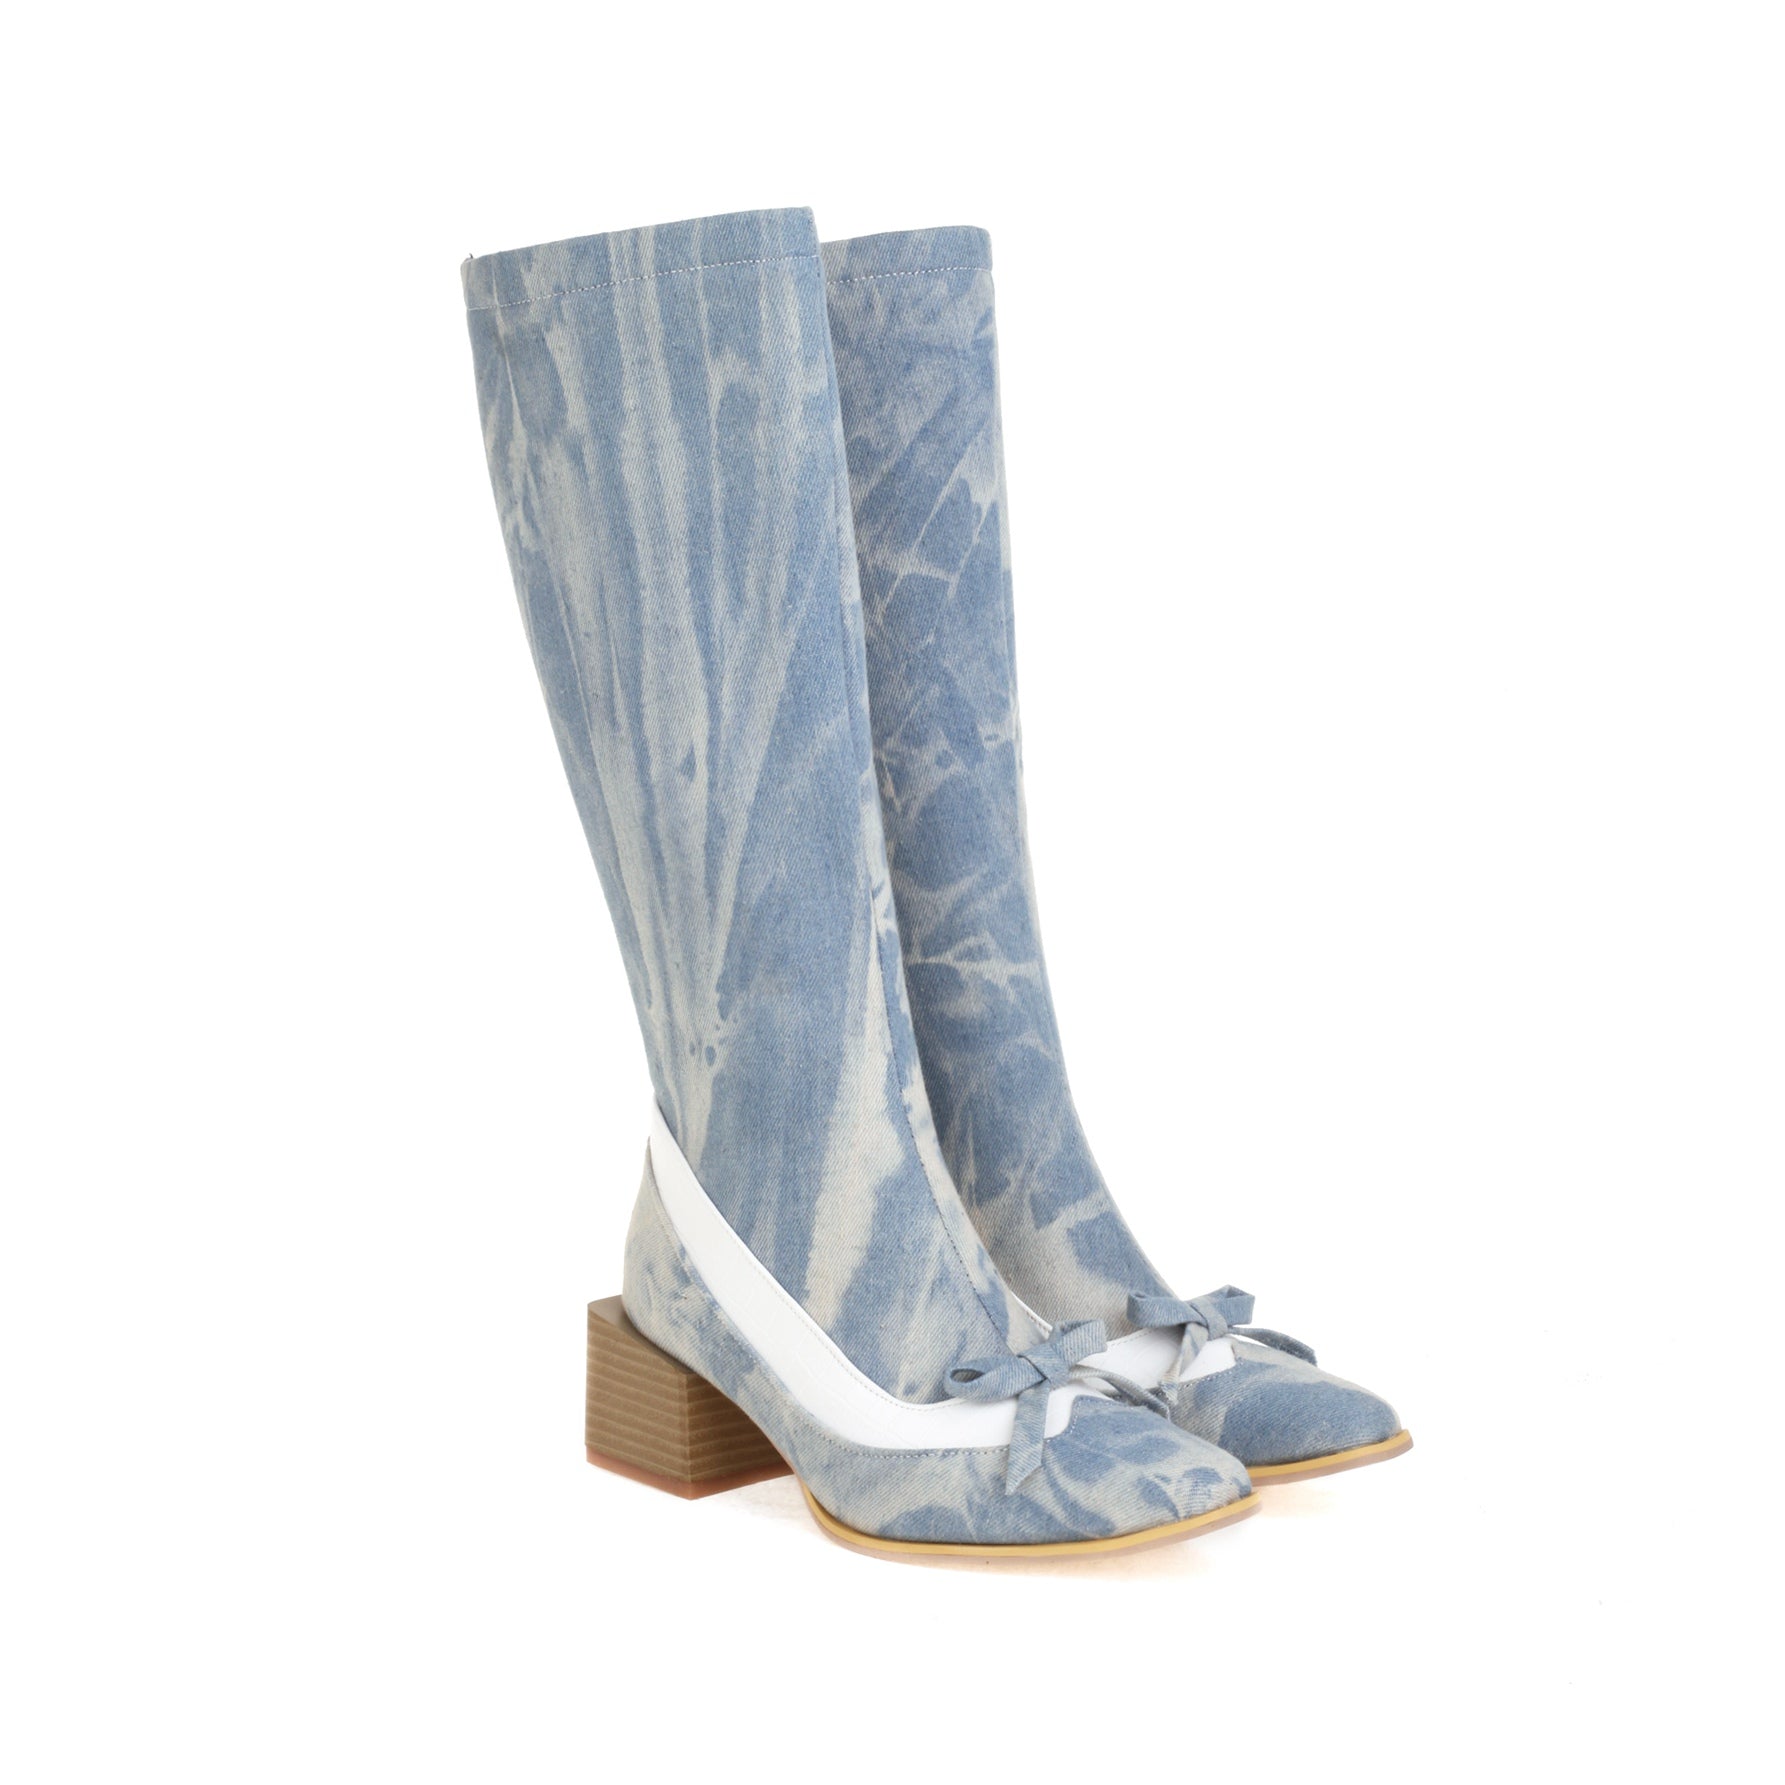 Bigsizeheels Simple Bow Pointed Over-The-Knee Boots-Pale blue freeshipping - bigsizeheel®-size5-size15 -All Plus Sizes Available!